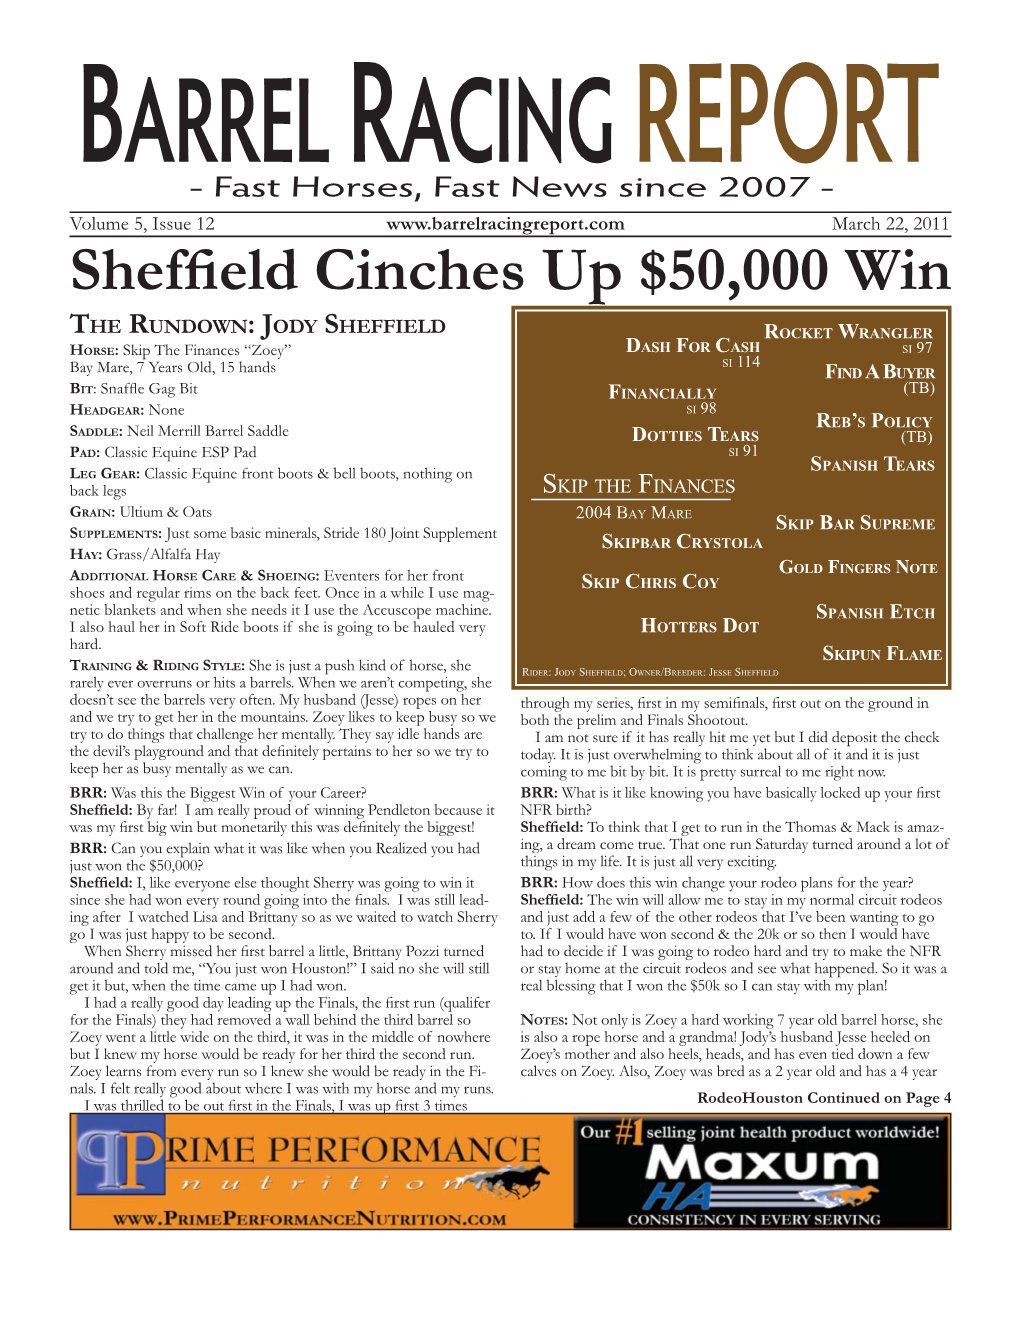 Sheffield Cinches up $50,000